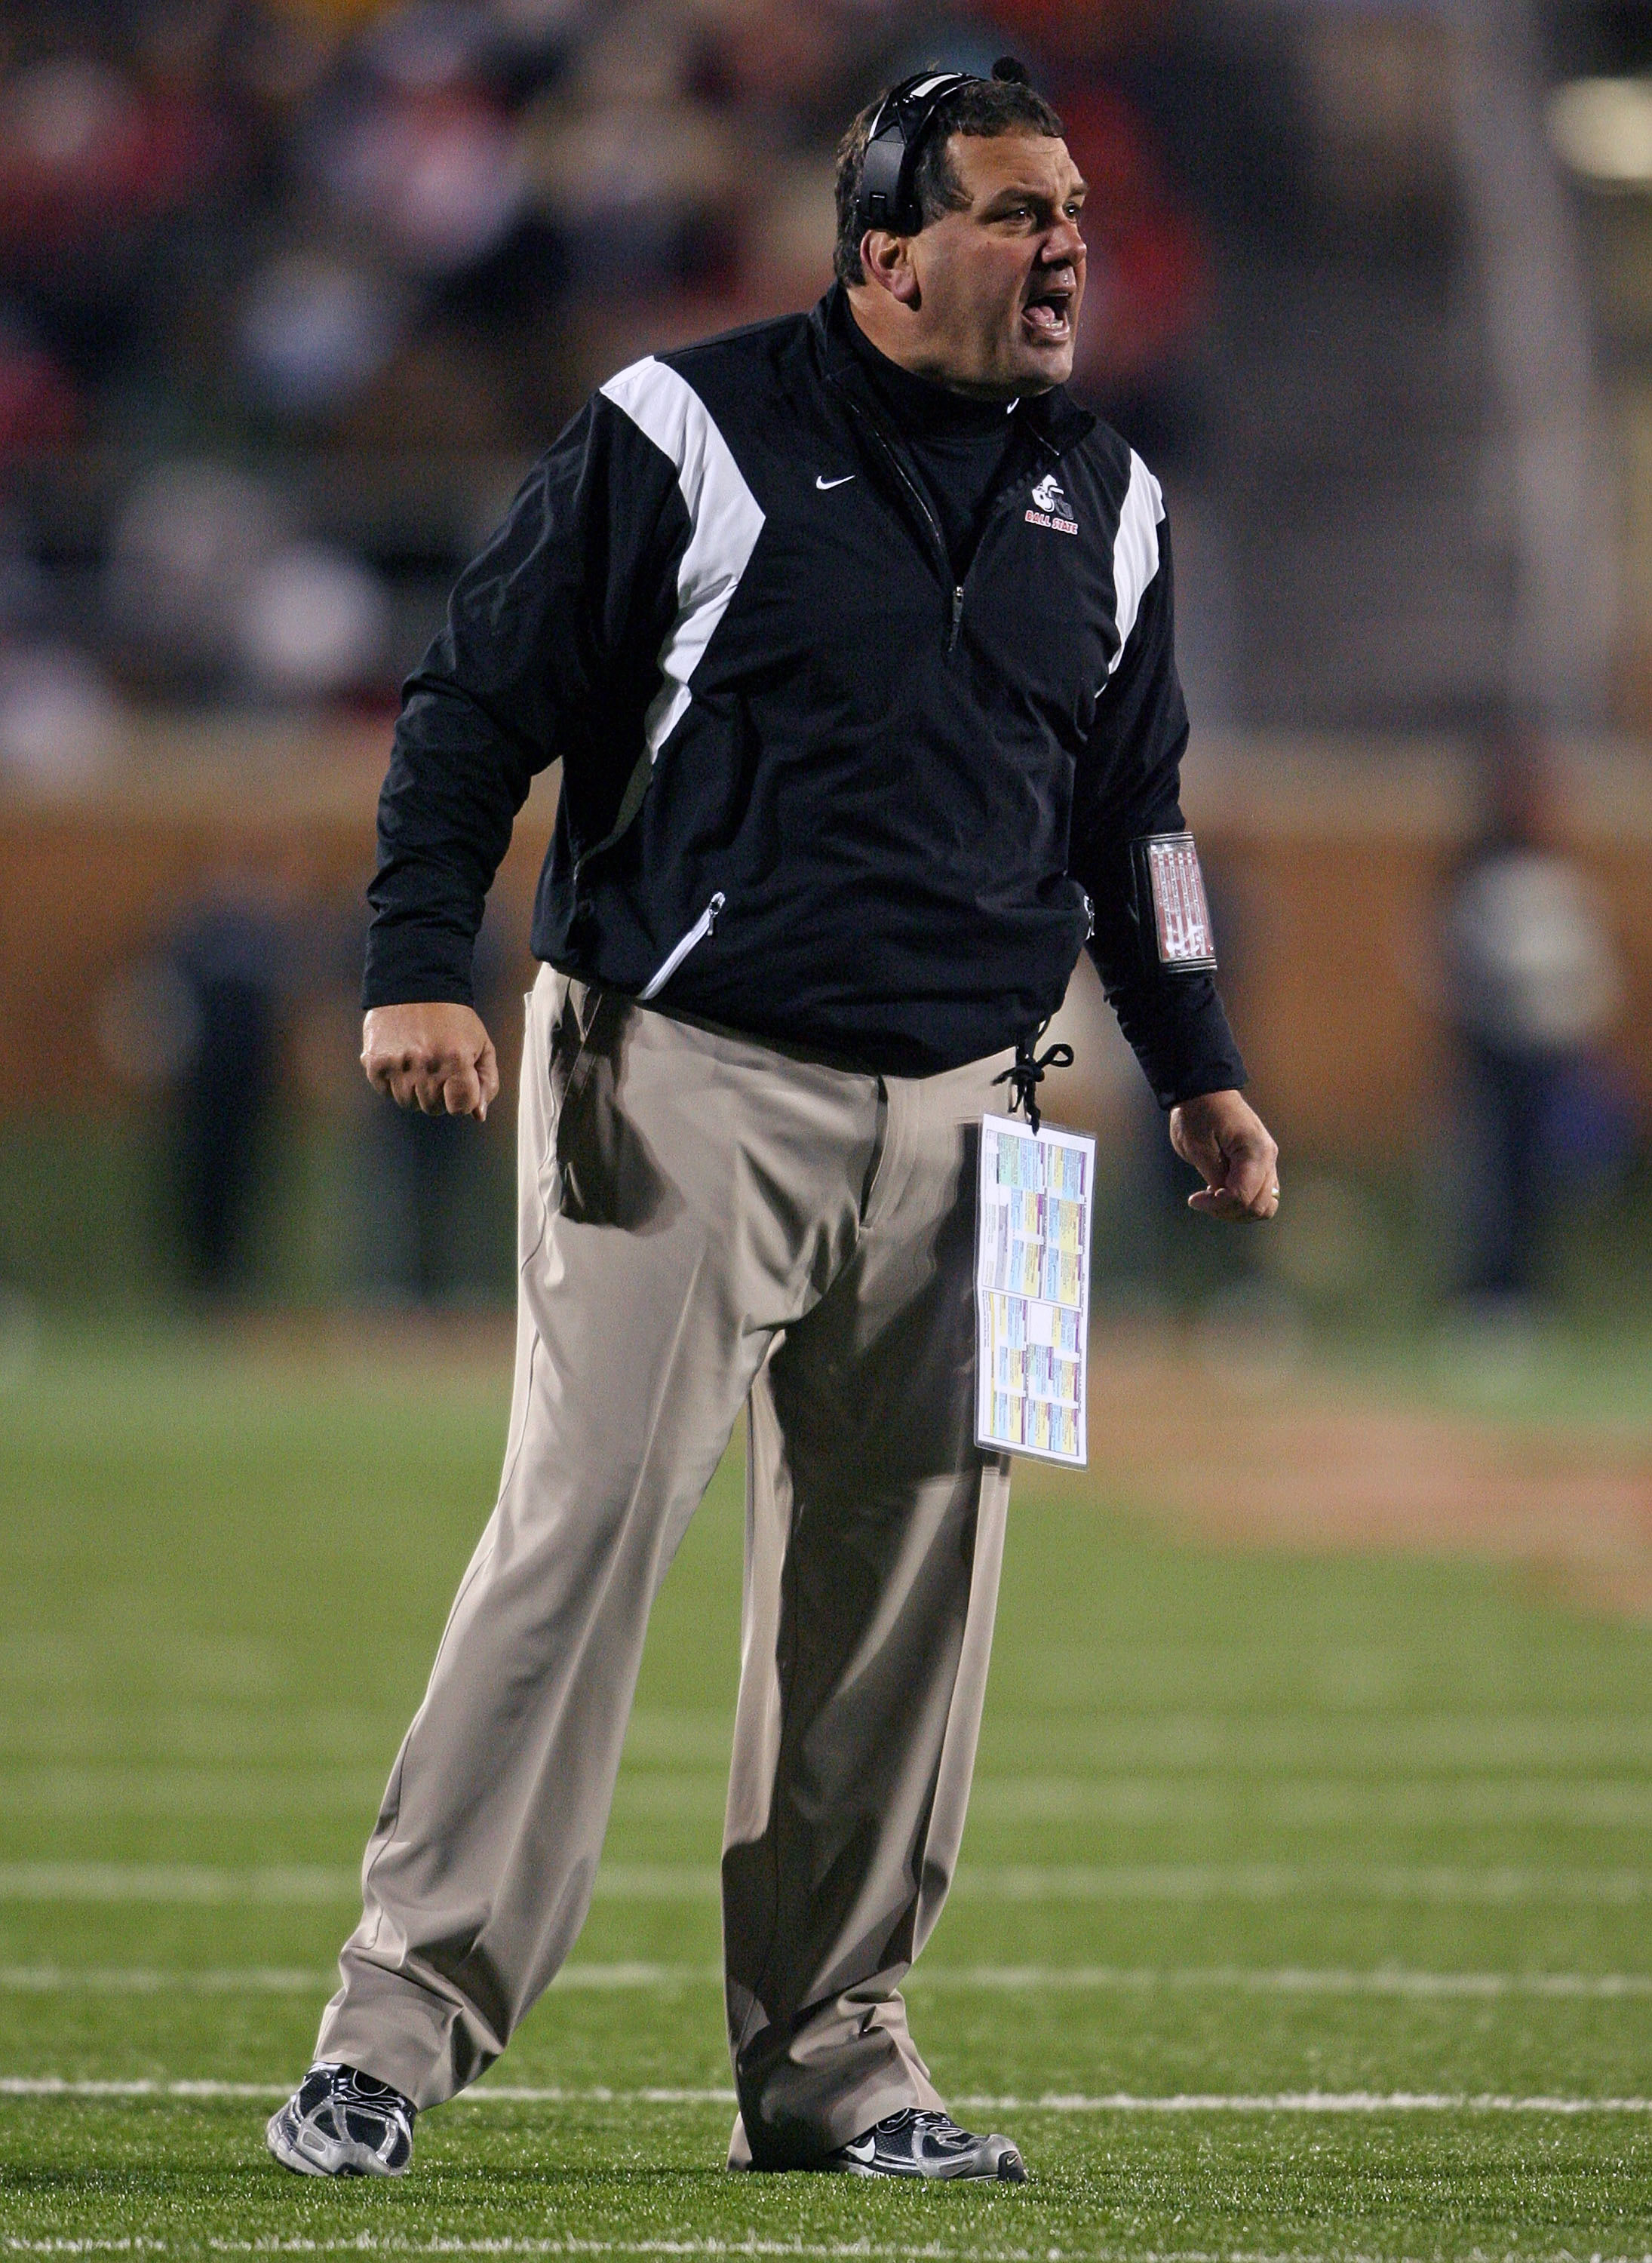 MUNCIE, IN - NOVEMBER 25:  Head coach Brady Hoke of the Ball State Cardinals stands on the field during the Mid-American Conference (MAC) game against the Western Michigan Broncos at Scheumann Stadium November 25, 2008 in Muncie, Indiana.  (Photo by Andy